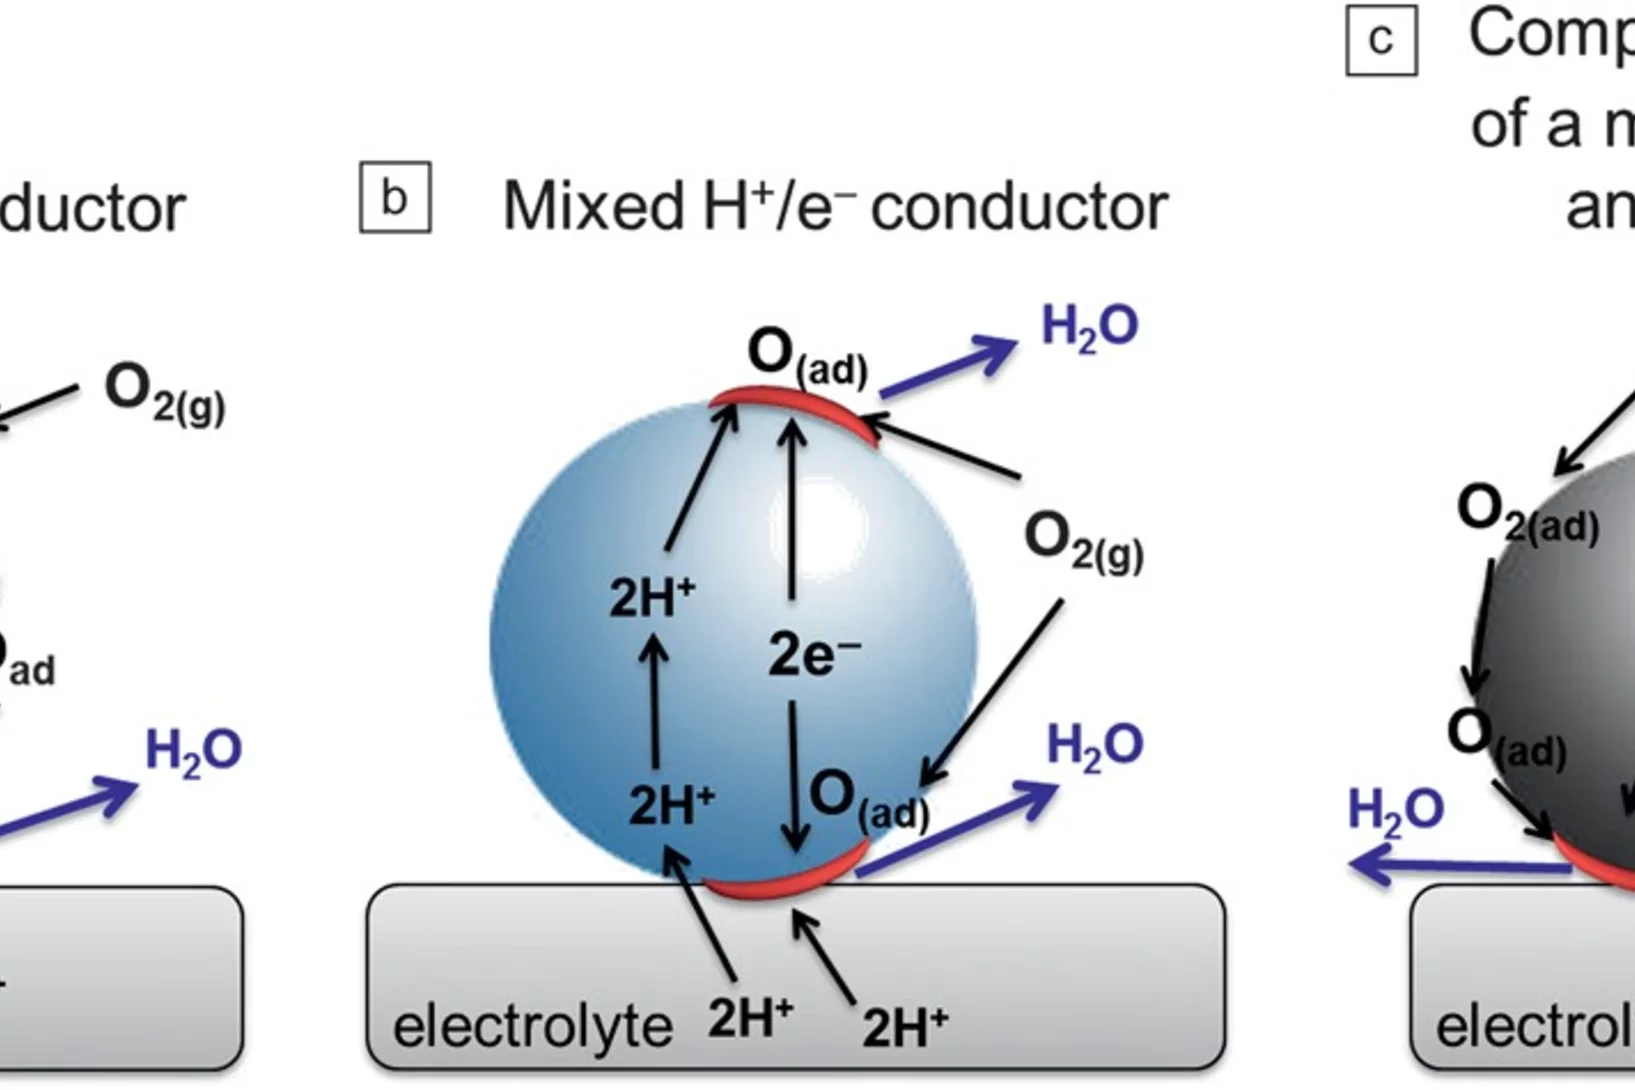 Possible reactions at the cathode using (a) a mixed O2- ion/e− conductor, (b) a mixed H+/e− conductor, and (c) a composite cathode made of a proton conductor phase and a mixed O2–/e− conductor phase. The dark gray spheres represent a mixed O2–/e− conductor phase, the light blue sphere is a mixed H+/e– conductor, while the light gray sphere is a H+ conductor. The red semicircles represent the reaction sites where the oxygen reduction takes place.